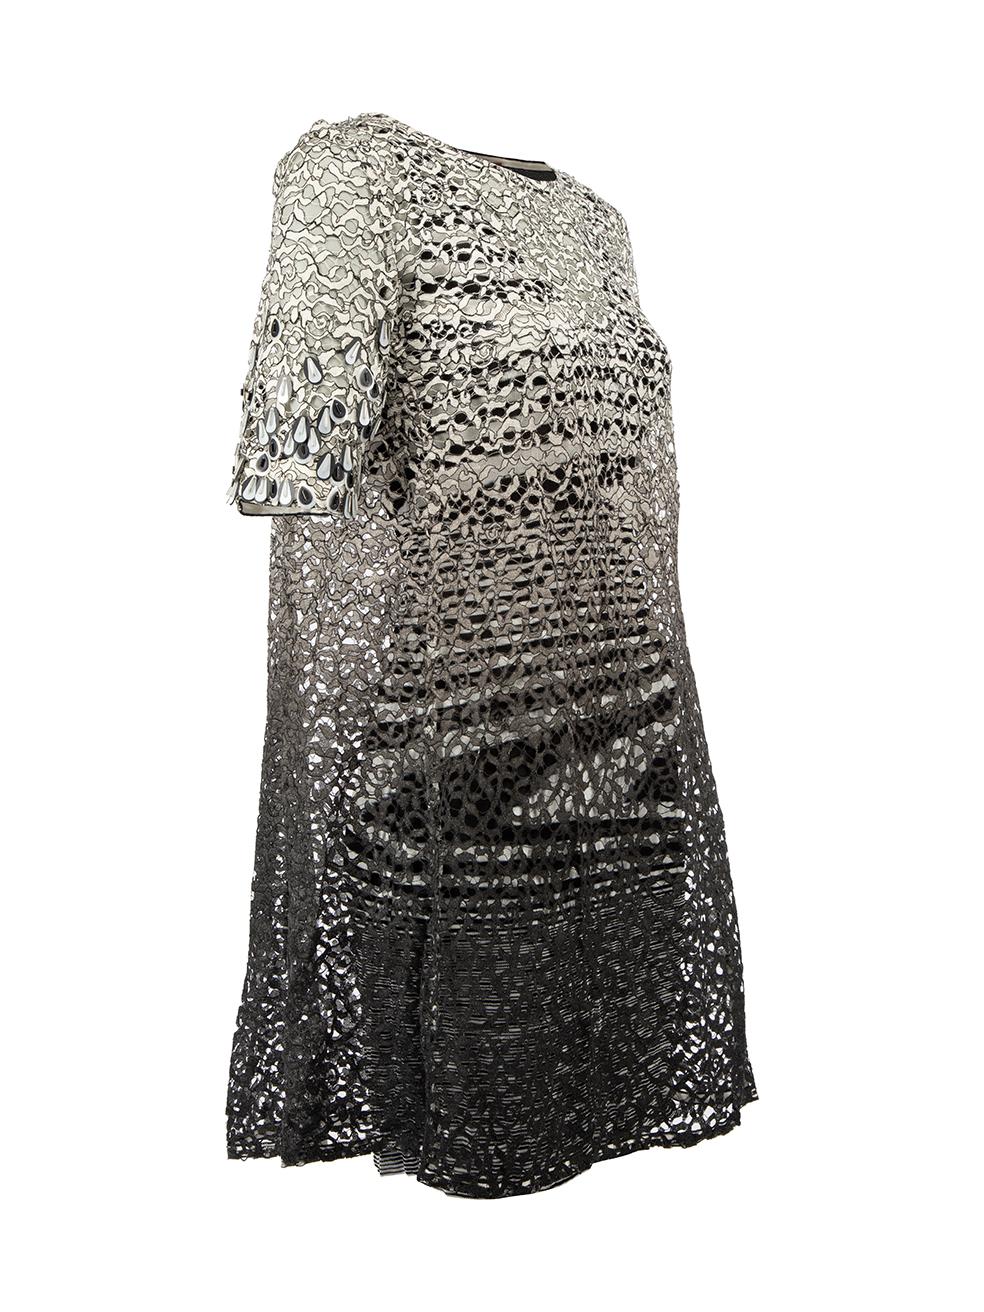 CONDITION is Very good. Hardly any visible wear to dress is evident on this used Missoni designer resale item. Details White, grey and black Synthetic Mini bilayer dress Degrading colour Sequinned scale short sleeves Striped under layer Boat